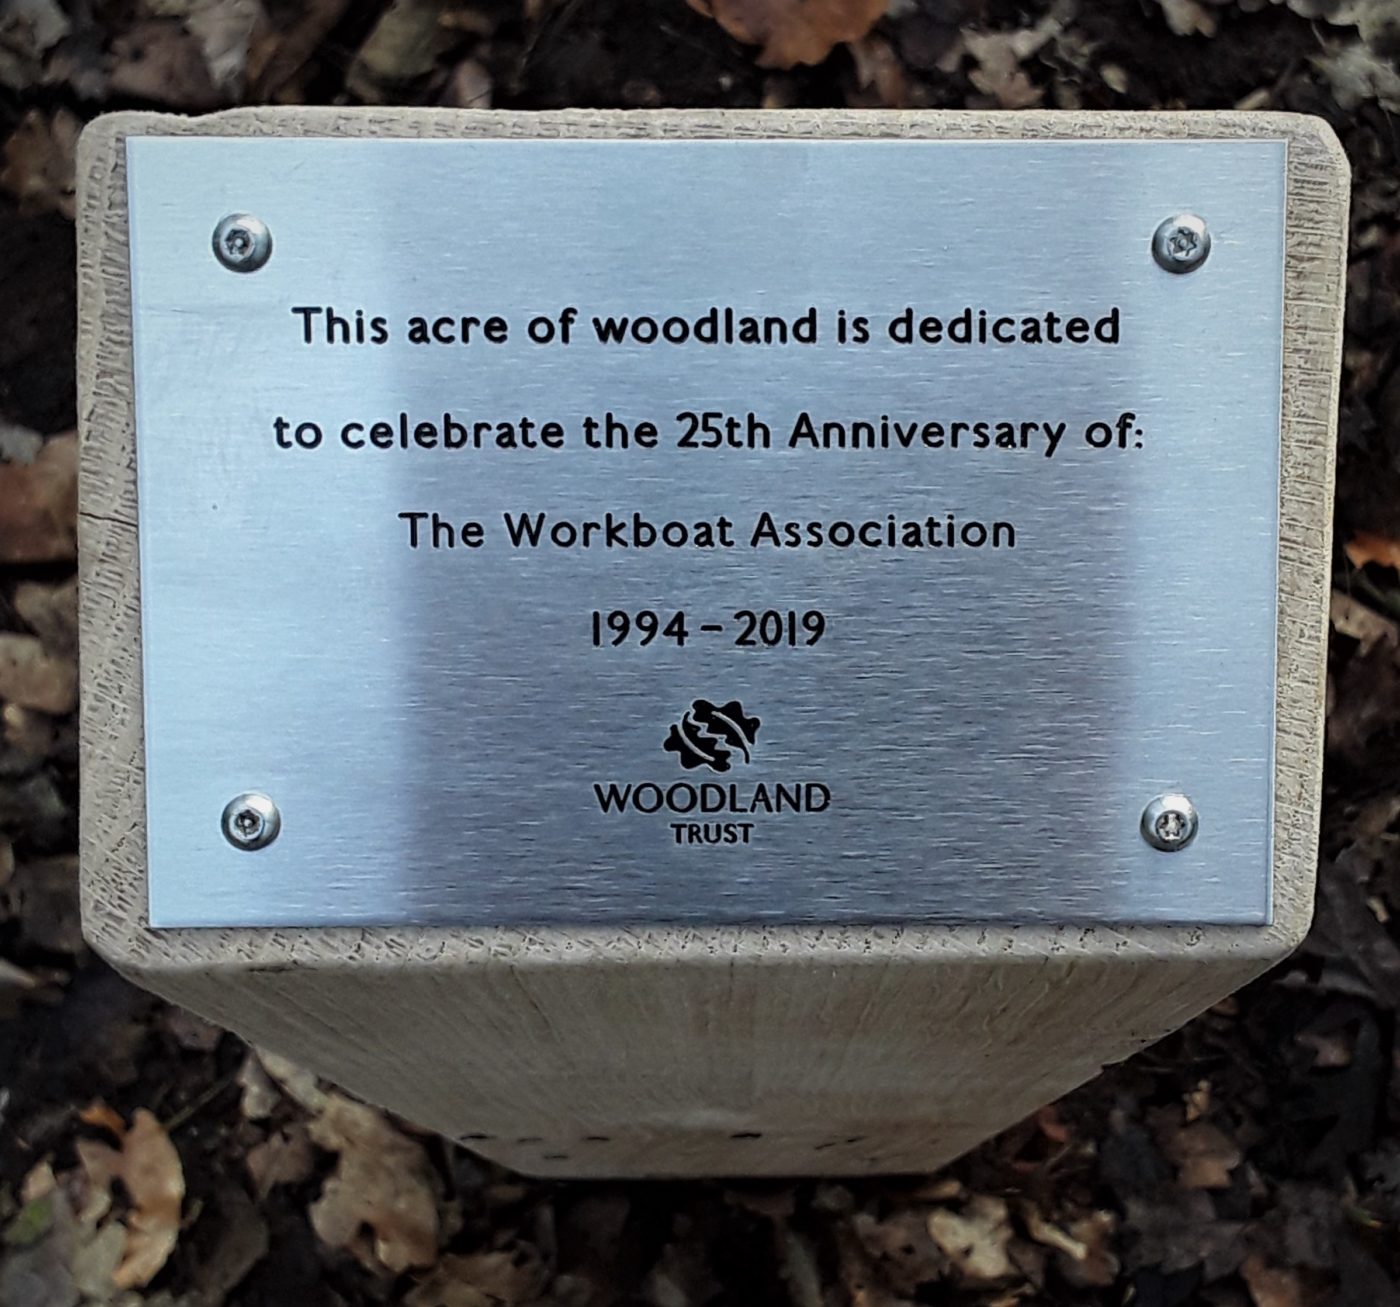 Workboat Association honour the Woodland Trust to mark their 25th Anniversary